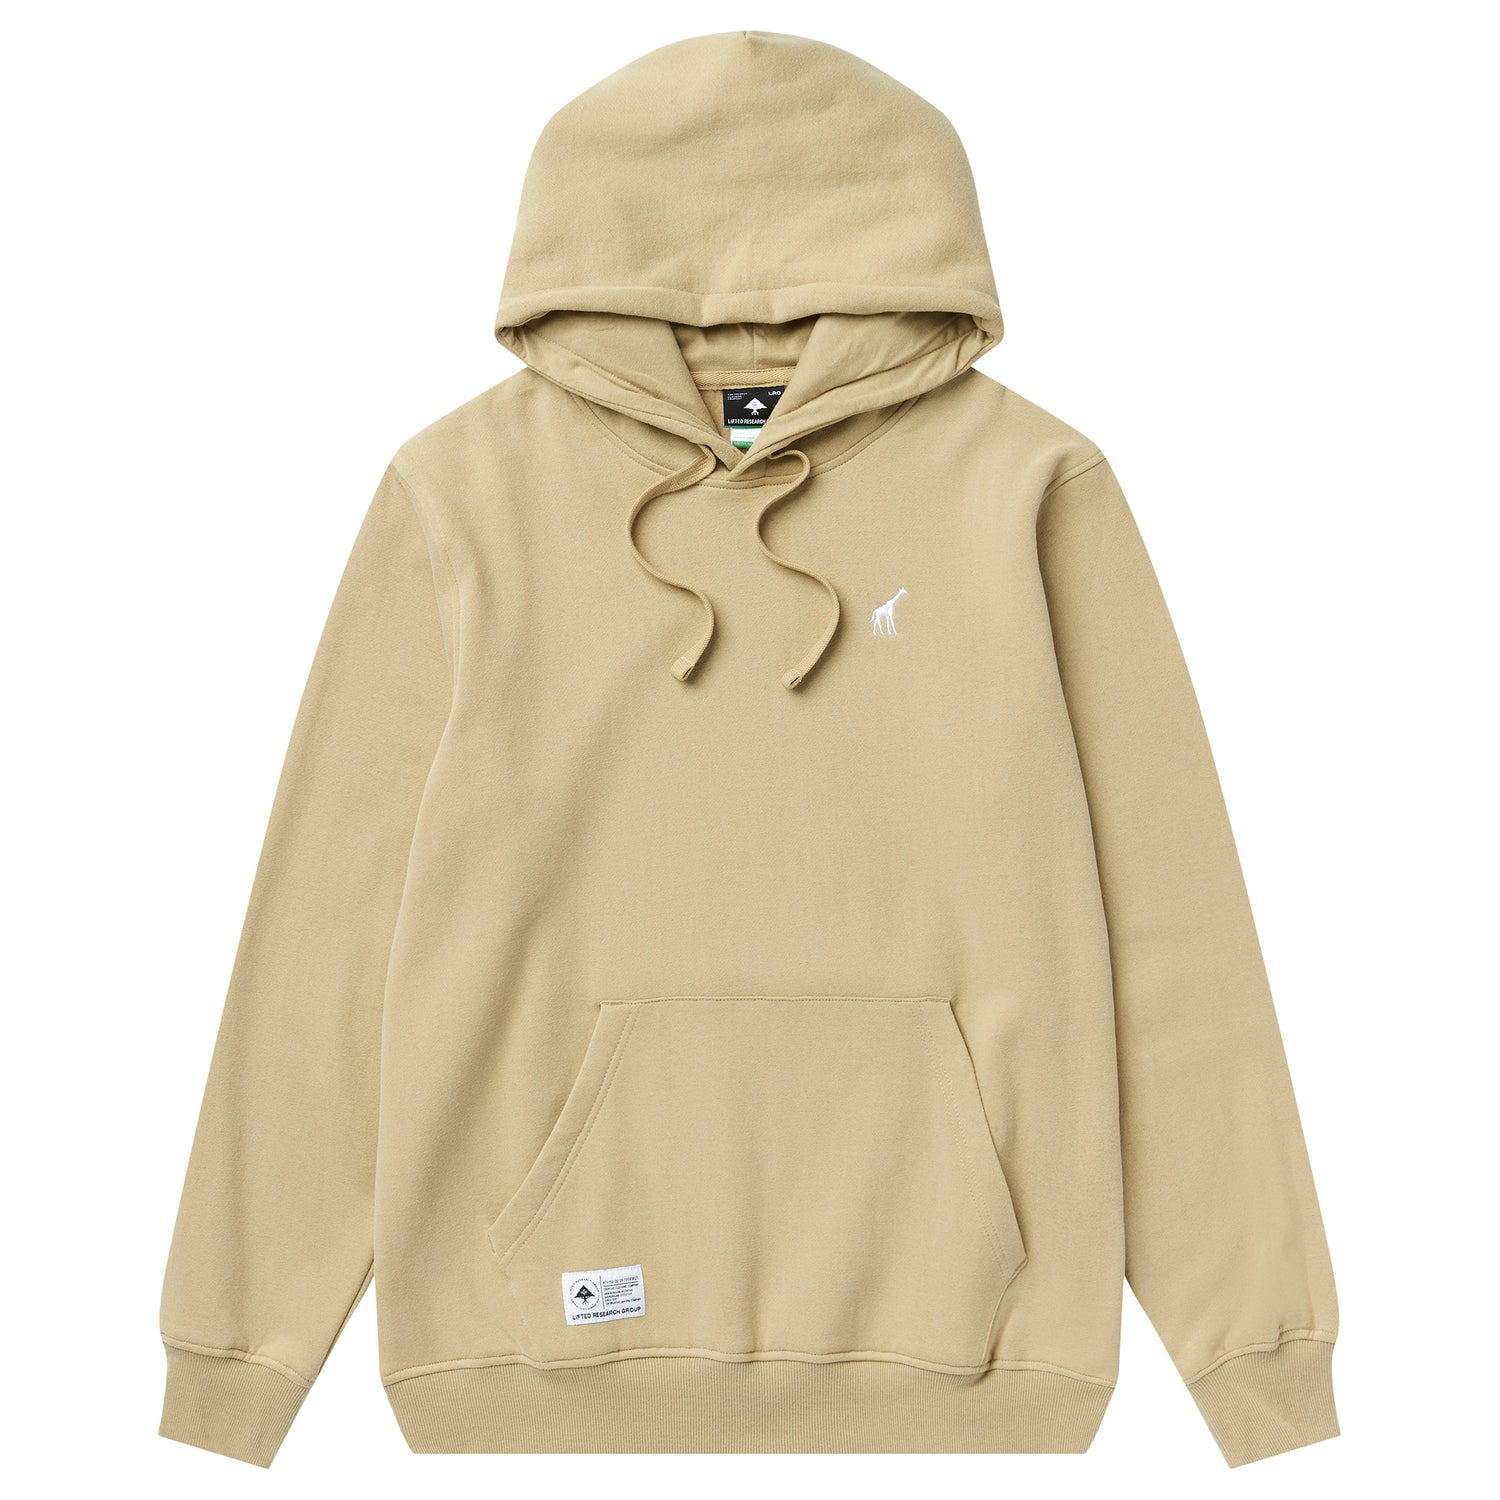 47 PULLOVER HOODIE - TWILL